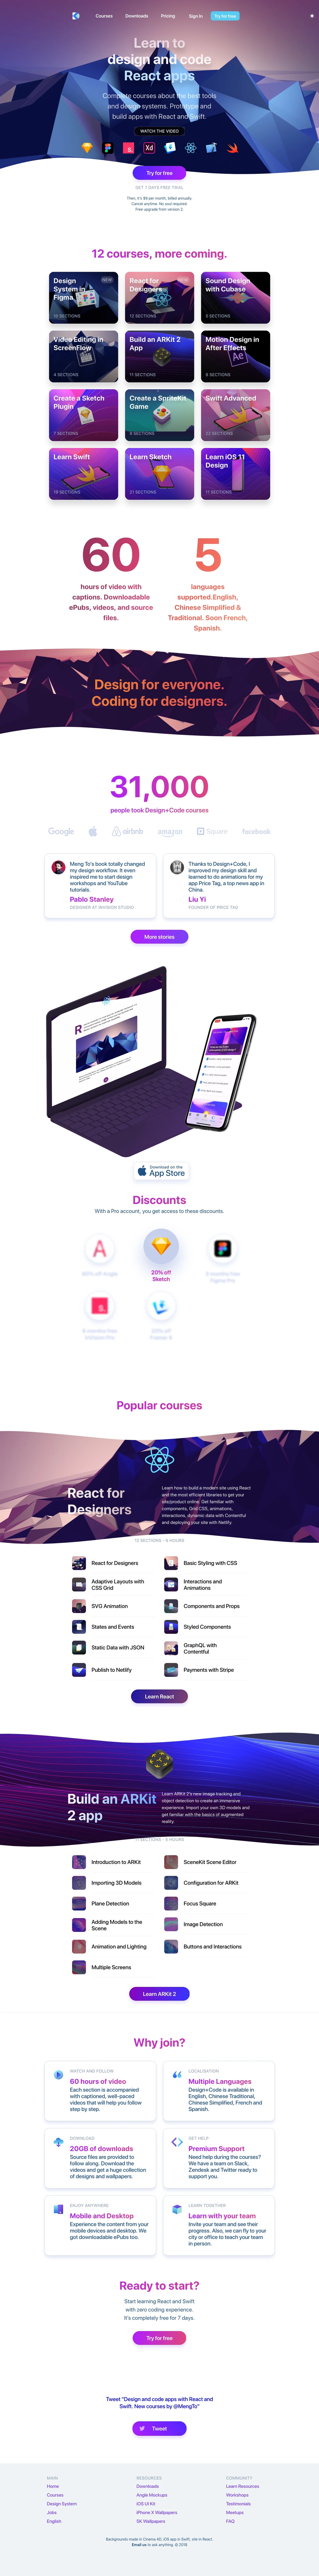 Design+Code Landing Page Example: Complete courses about the best tools and design systems. Prototype and build apps with React and Swift. 60 hours of video content and resource materials. No coding experience required.